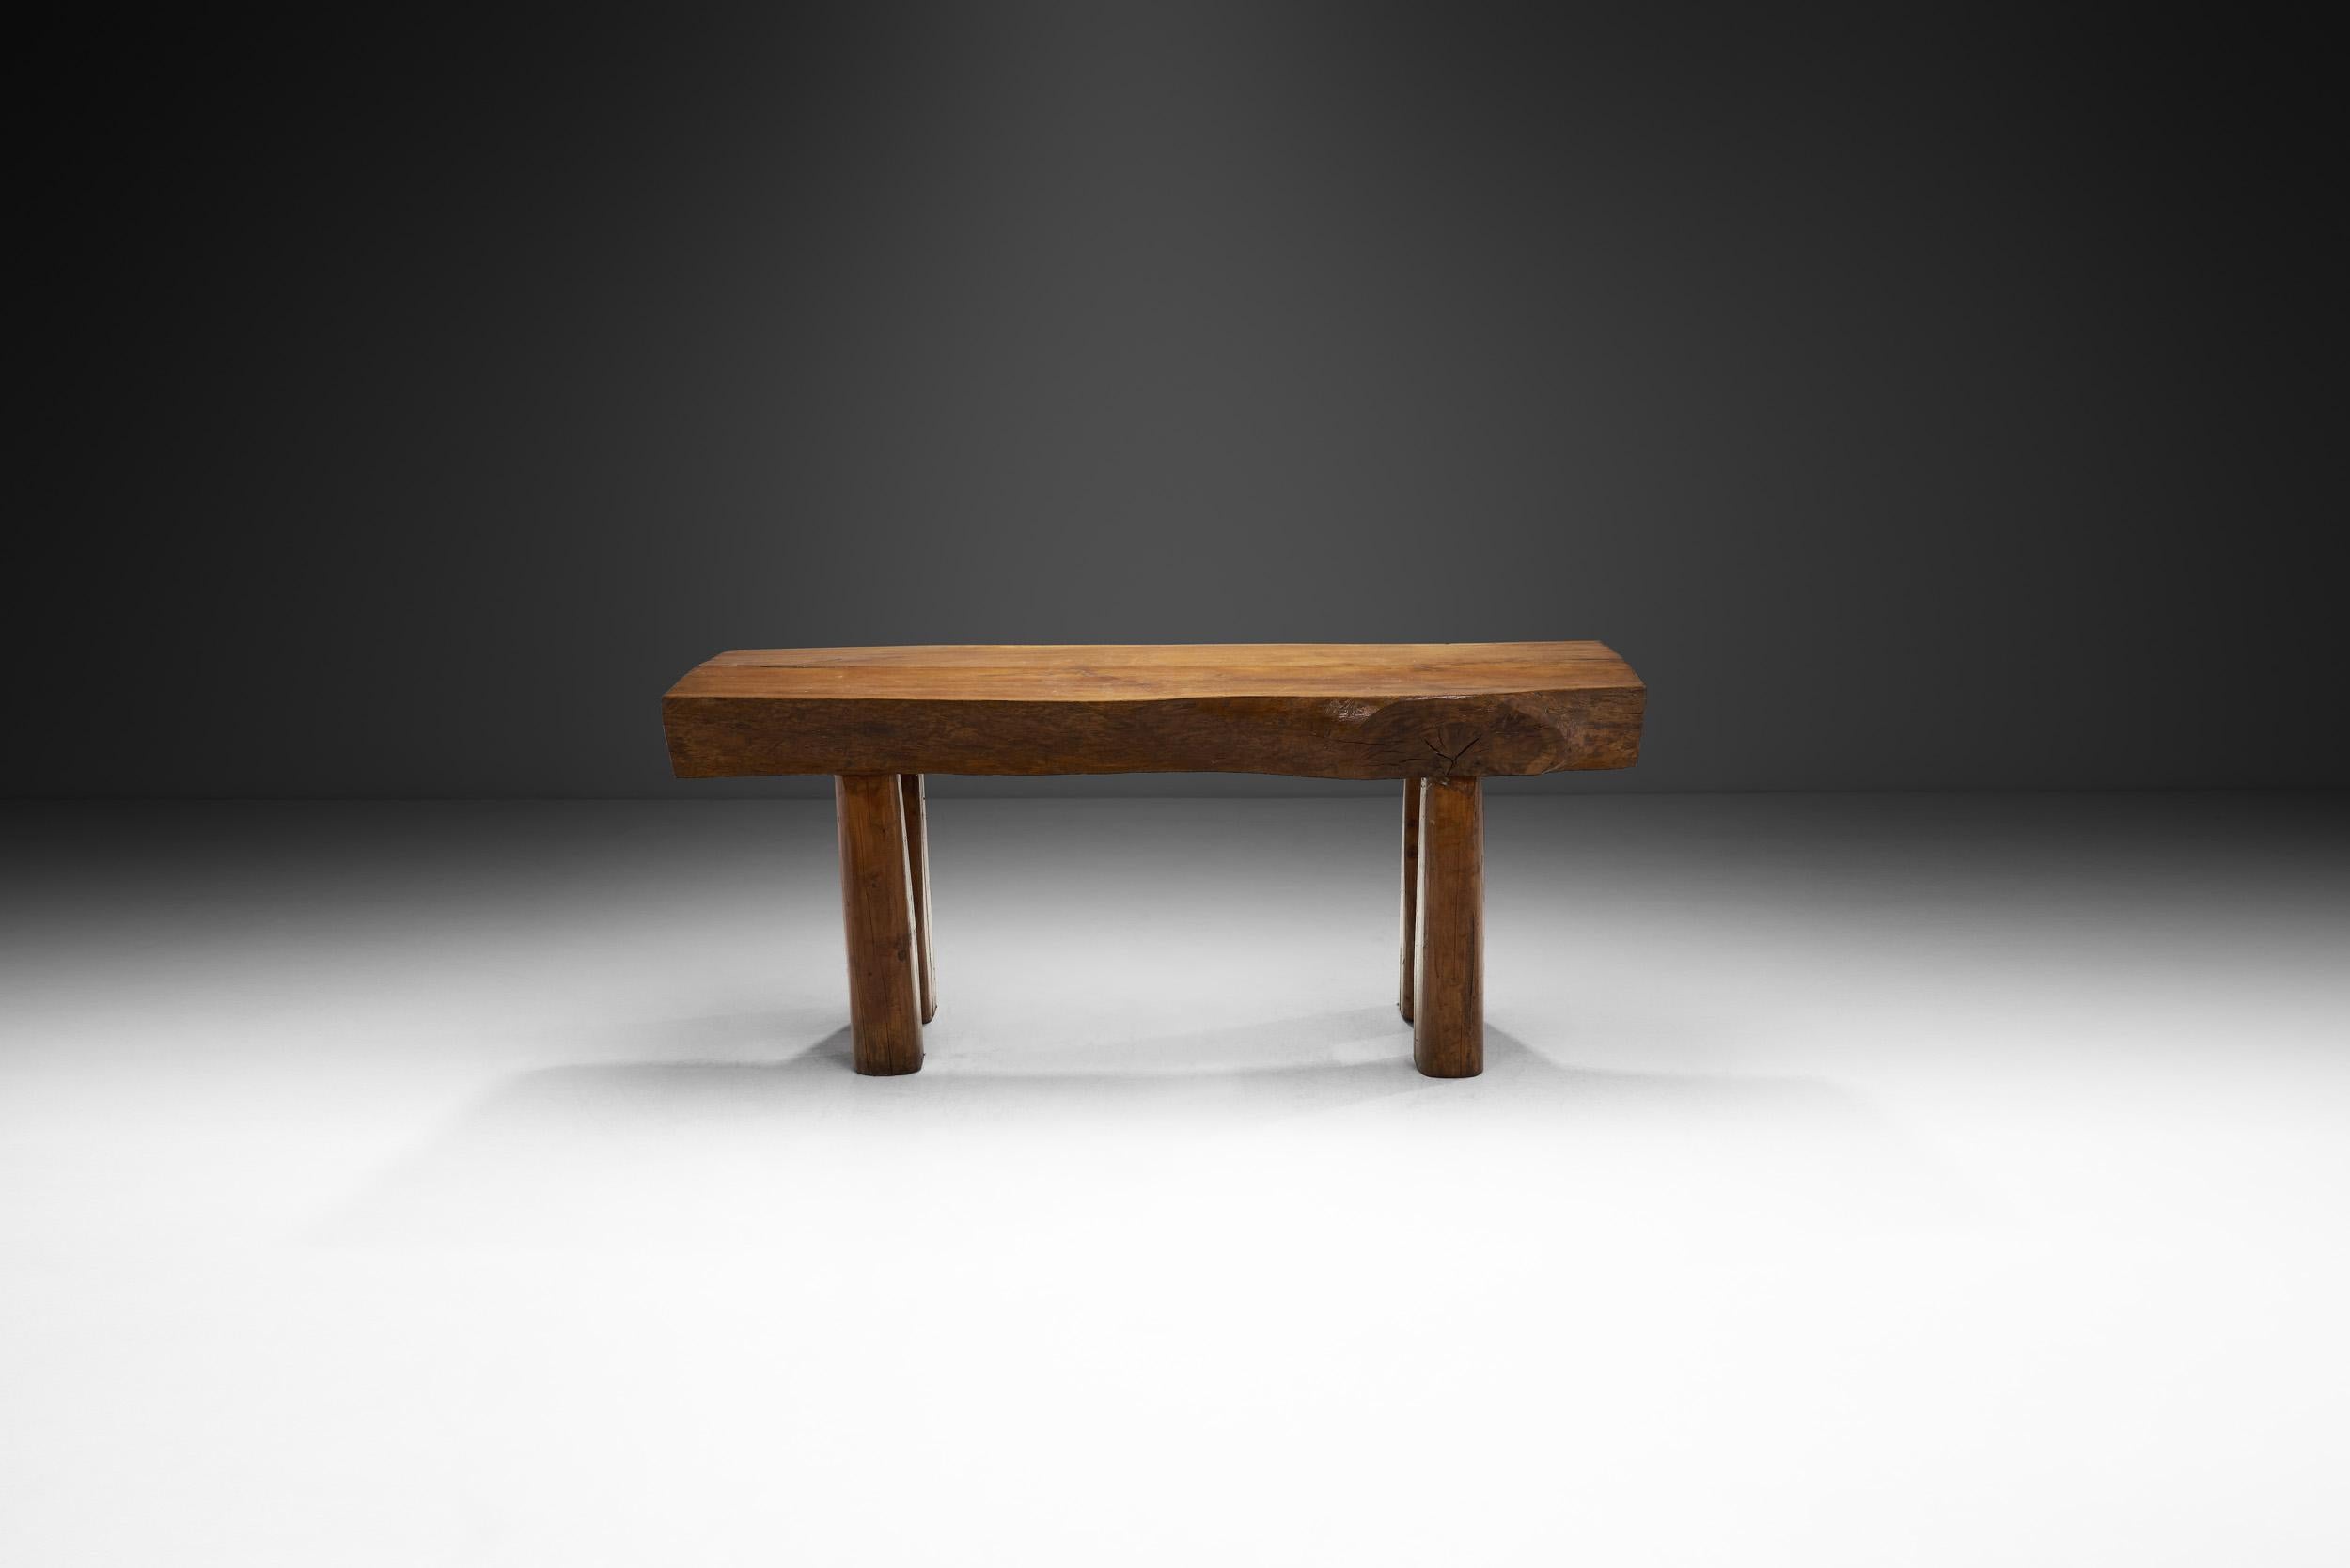 20th Century Norwegian Solid Wood Dining Table, Norway early 20th century